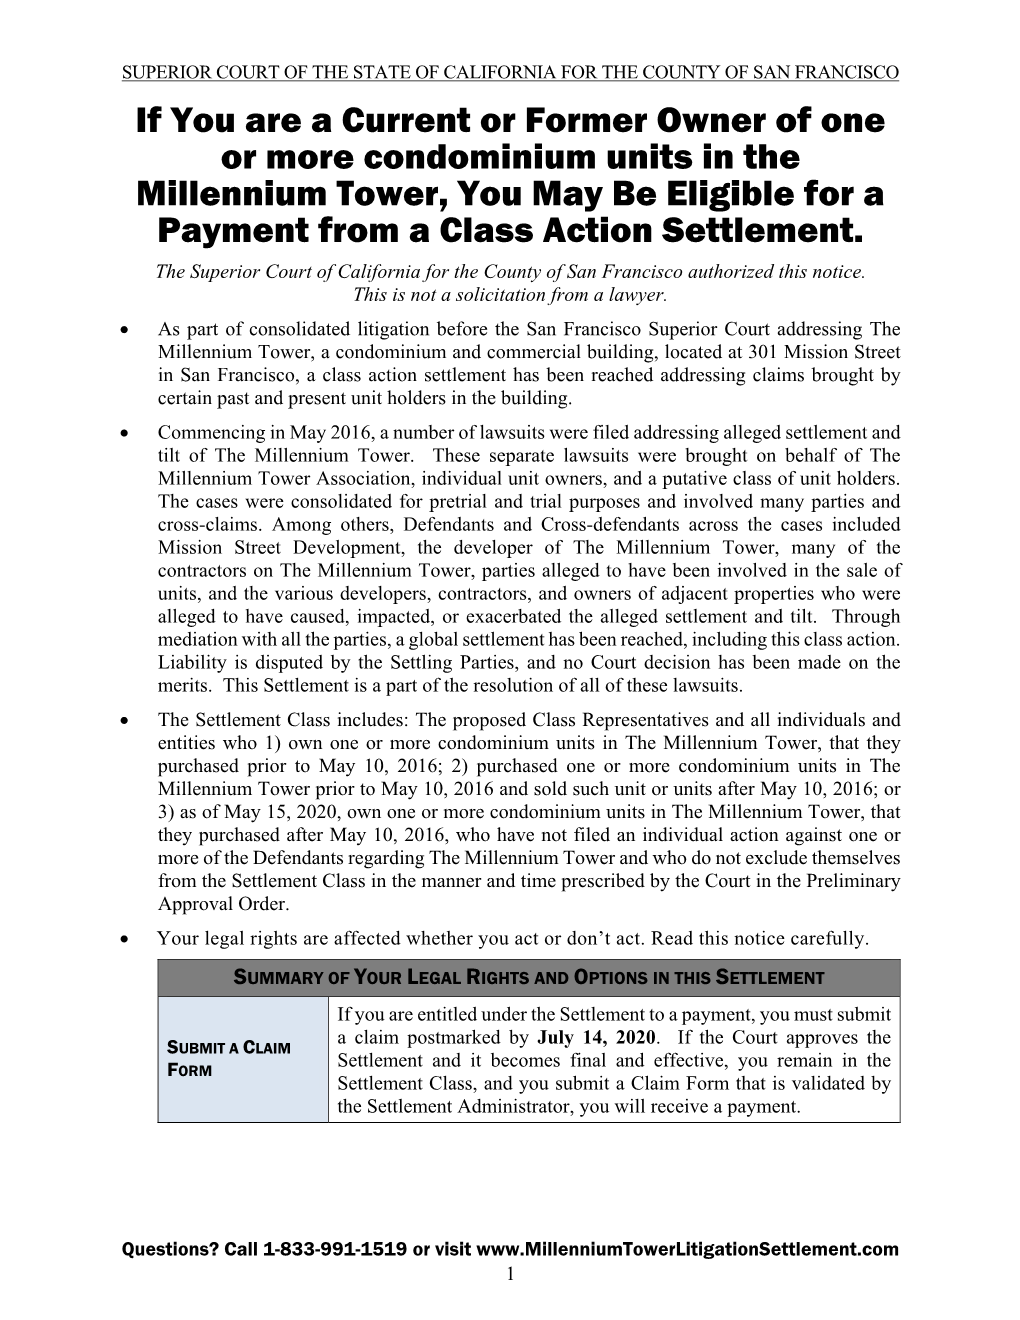 If You Are a Current Or Former Owner of One Or More Condominium Units in the Millennium Tower, You May Be Eligible for a Payment from a Class Action Settlement